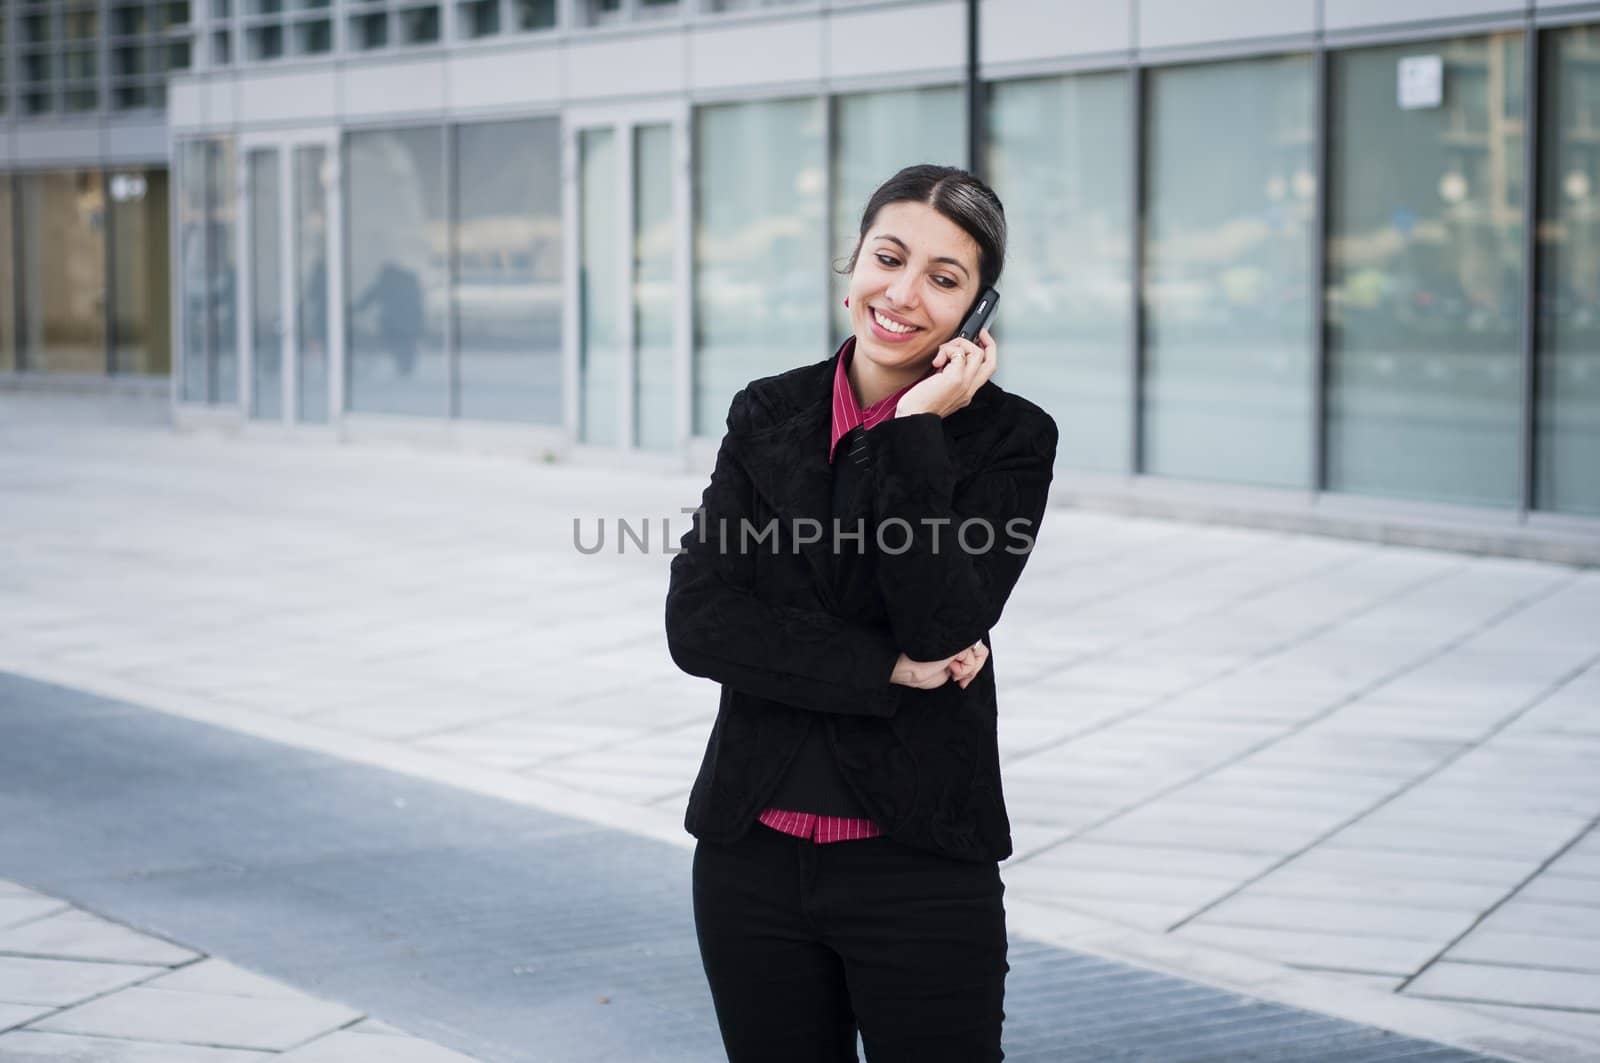 smiling business girl on the phone in front of a modern building